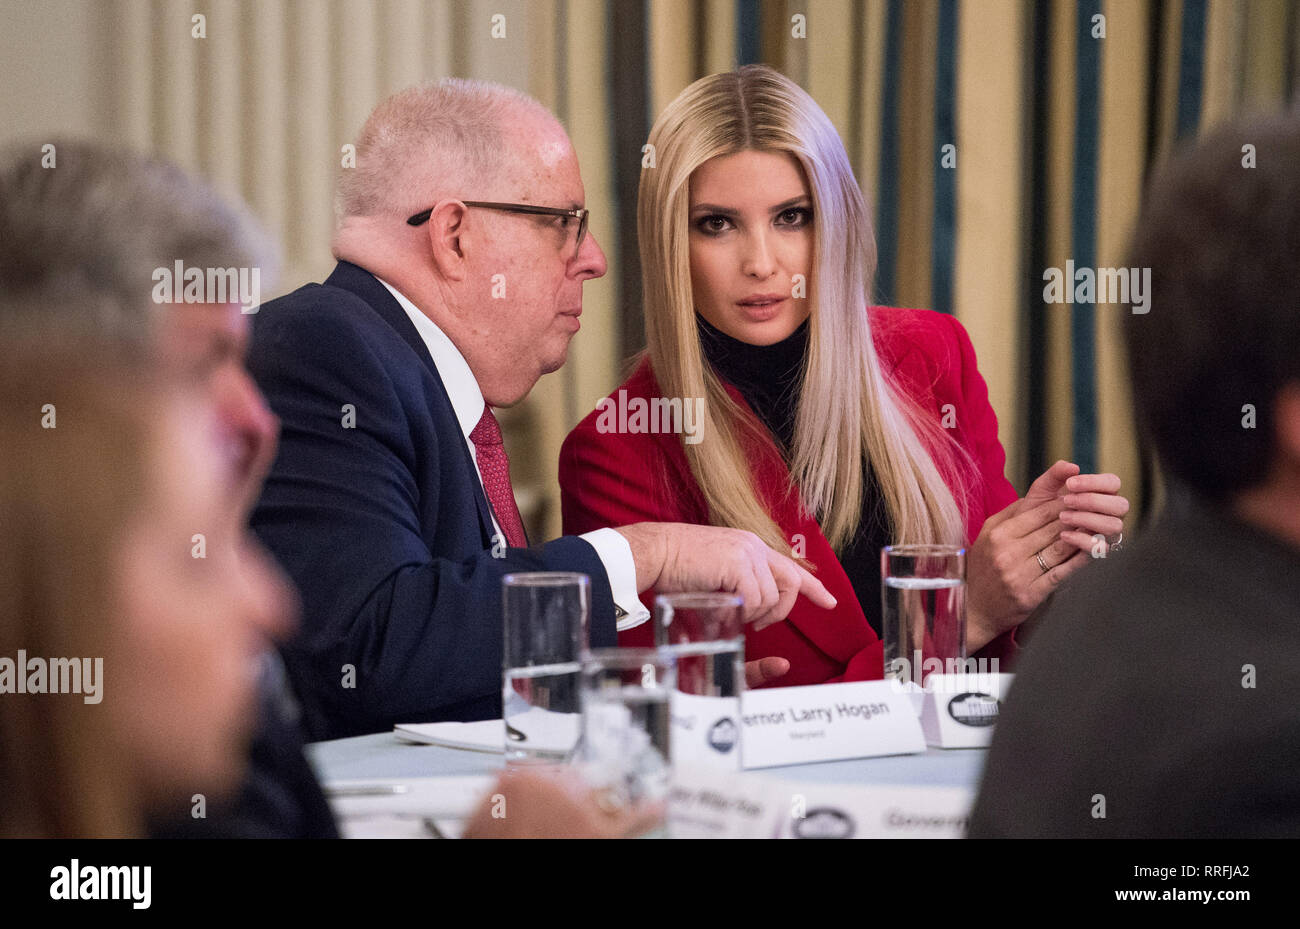 Governor Larry Hogan (Republican of Maryland) speaks to First Daughter and Advisor to the President Ivanka Trump as United States President Donald J. Trump address a group of governors during the 2019 White House Business Session at the White House in Washington, DC on February 25, 2019. Trump discusses the group on infrastructure, the opioid epidemic, border security and China trade policy. Credit: Kevin Dietsch/Pool via CNP /MediaPunch Stock Photo